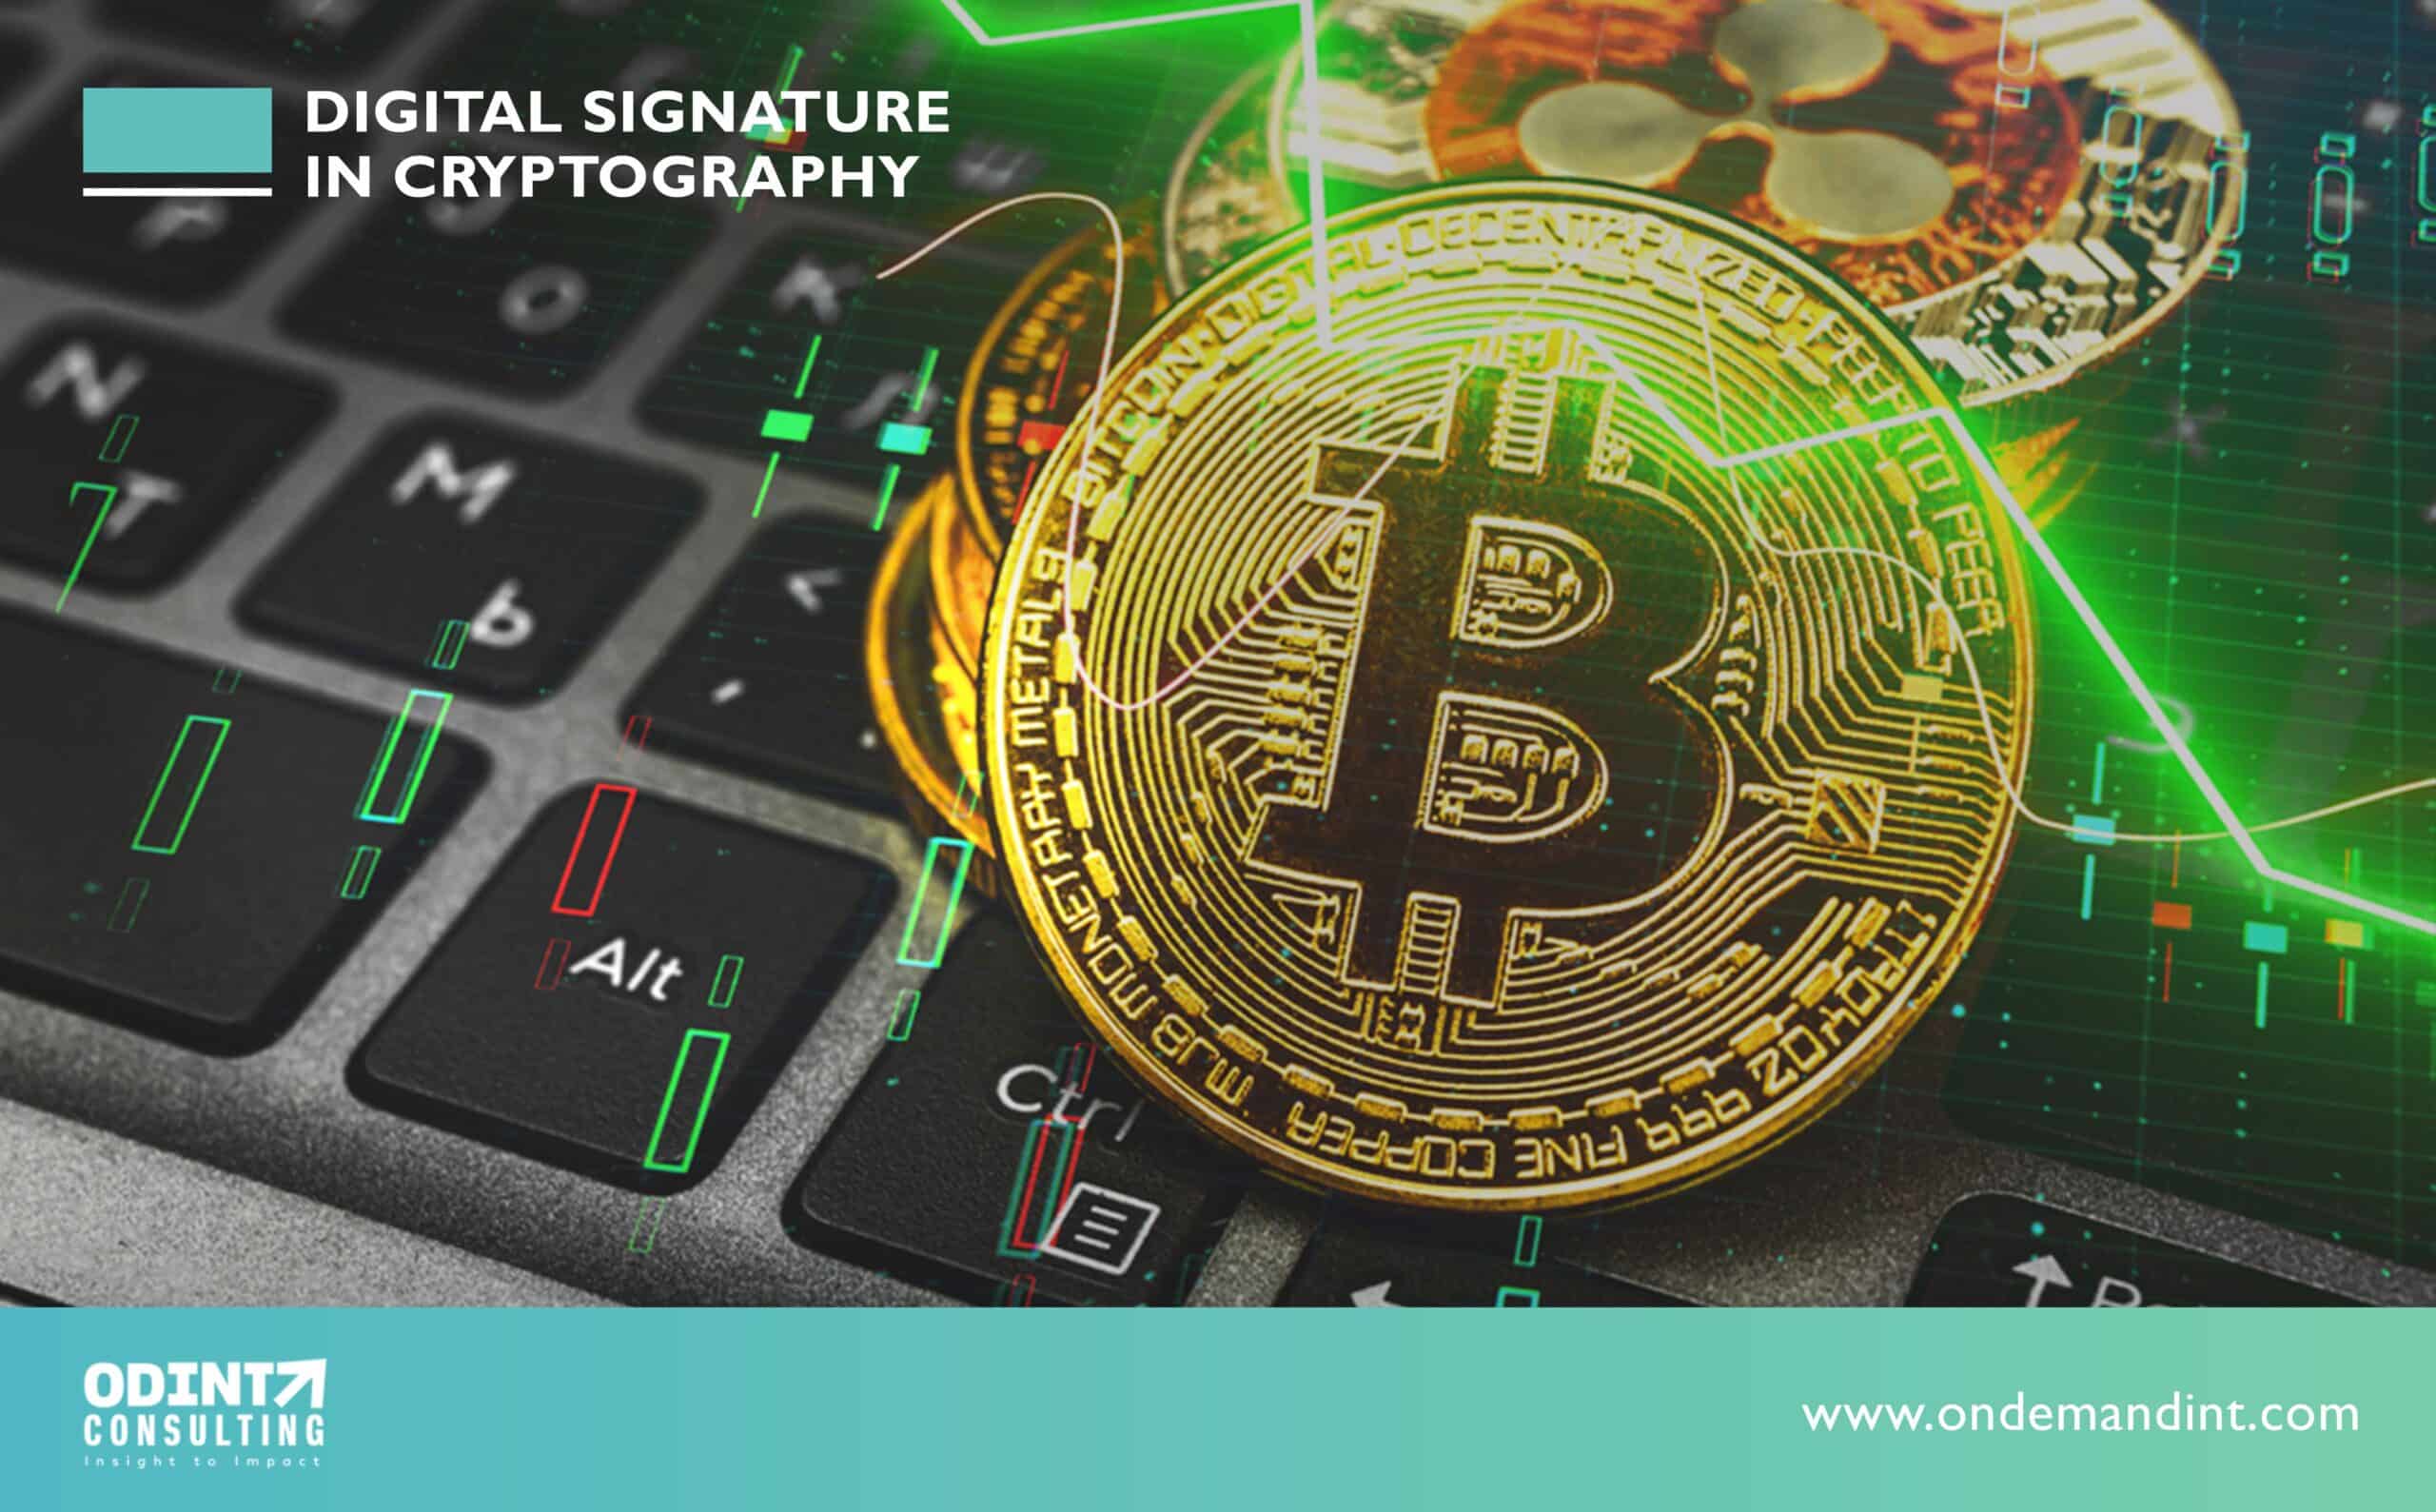 3 Importance of Digital Signature in Cryptography